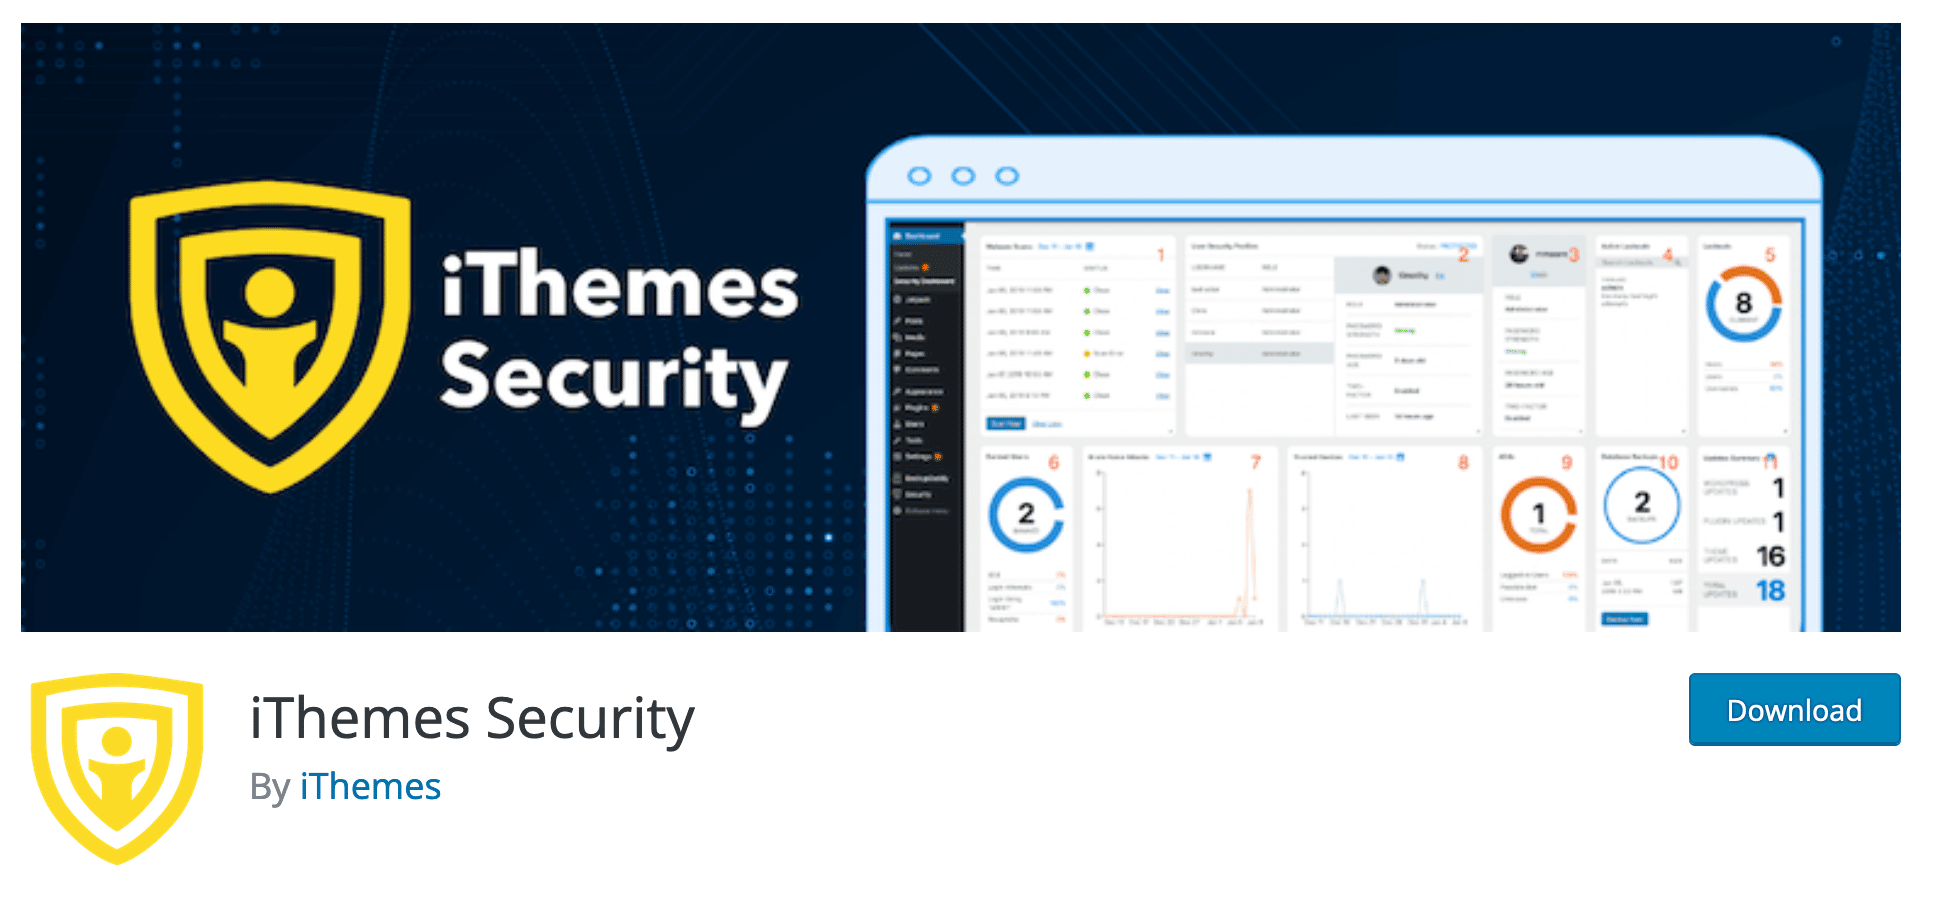 iThemes Security is a plugin for strengthening the security of WordPress.